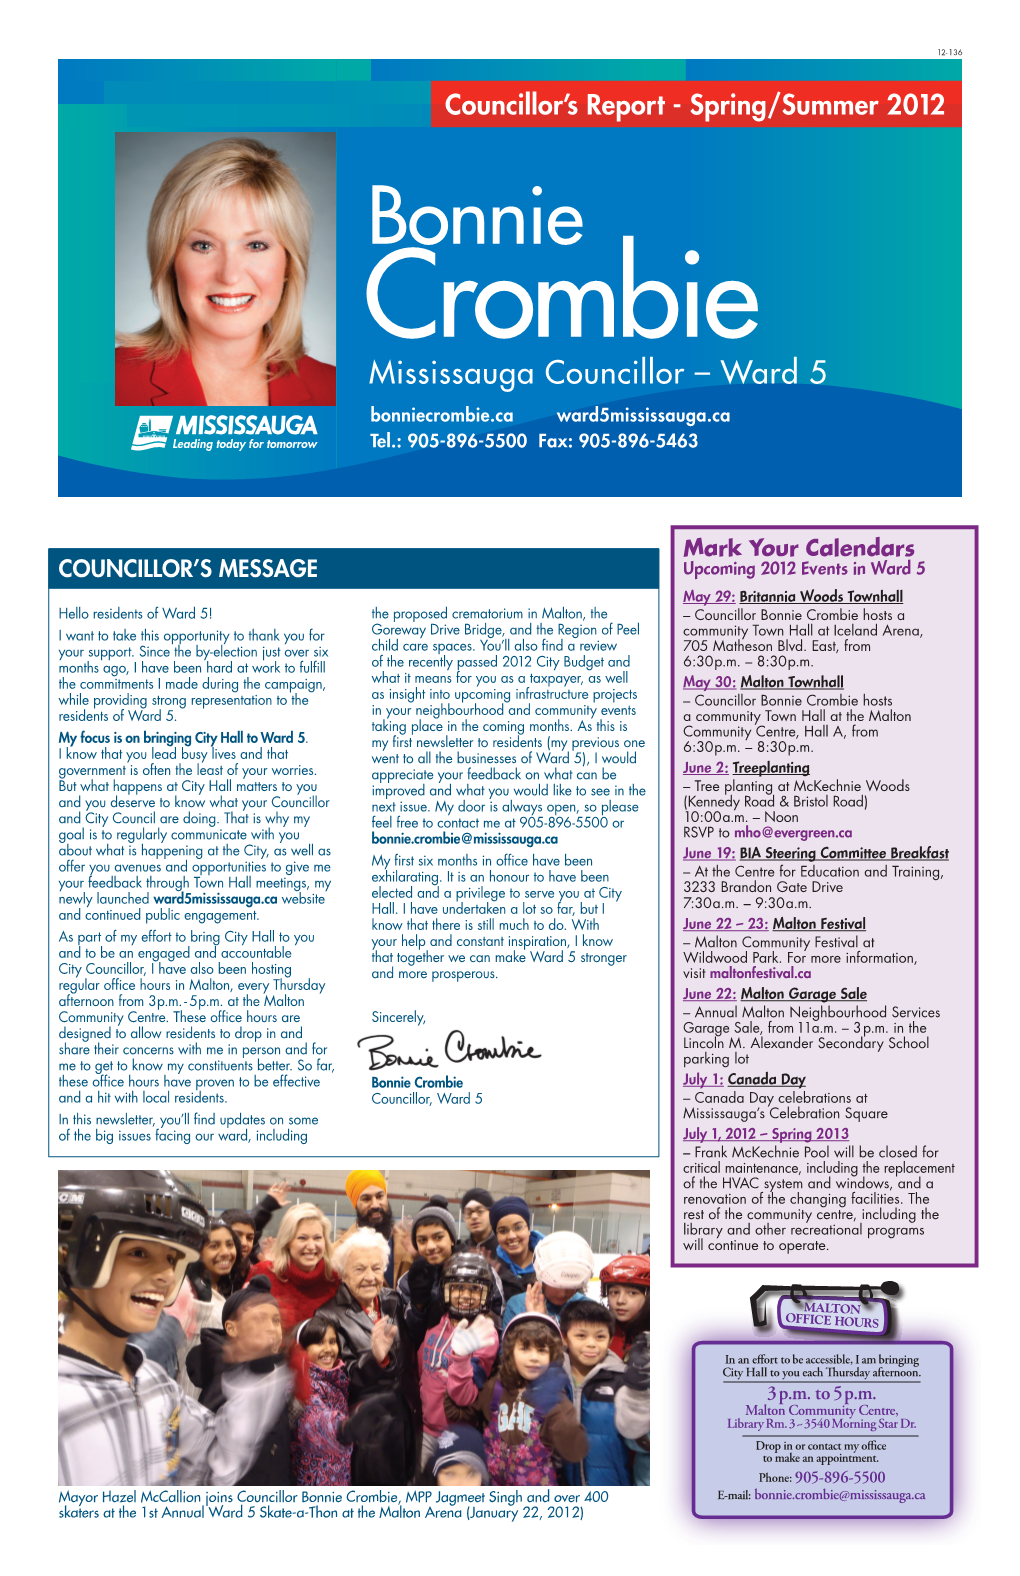 Bonnie Crombie Mississauga Councillor – Ward 5 Bonniecrombie.Ca Ward5mississauga.Ca Tel.: 905-896-5500 Fax: 905-896-5463